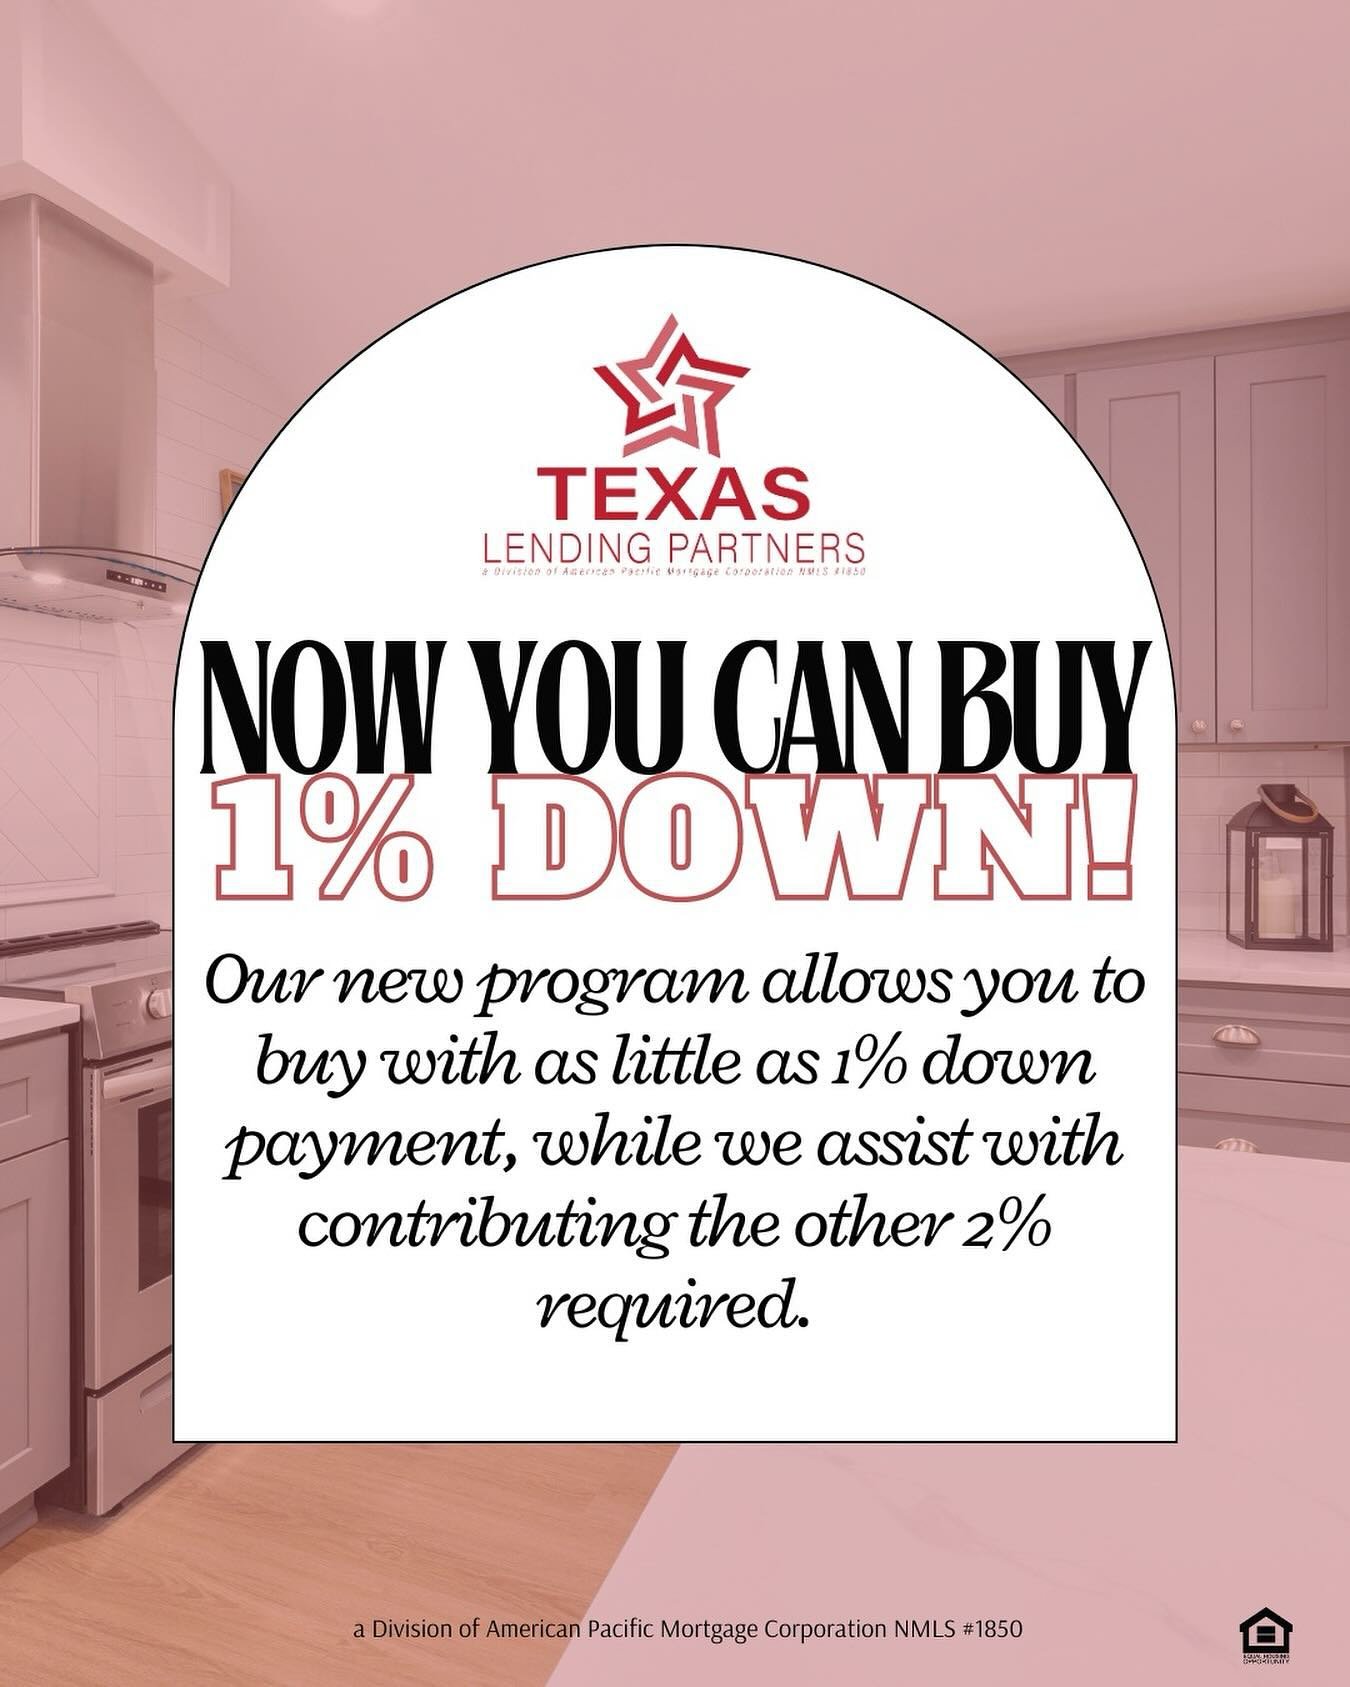 📢🚨Our new program allows you to buy with as little as 1% down payment, while we assist with contributing the other 2% required.

Comment 🔥 to find out more and connect with a loan officer. 

#satx #MortgageWithAHeart #SATXhomes #TLP #TexasLendingP